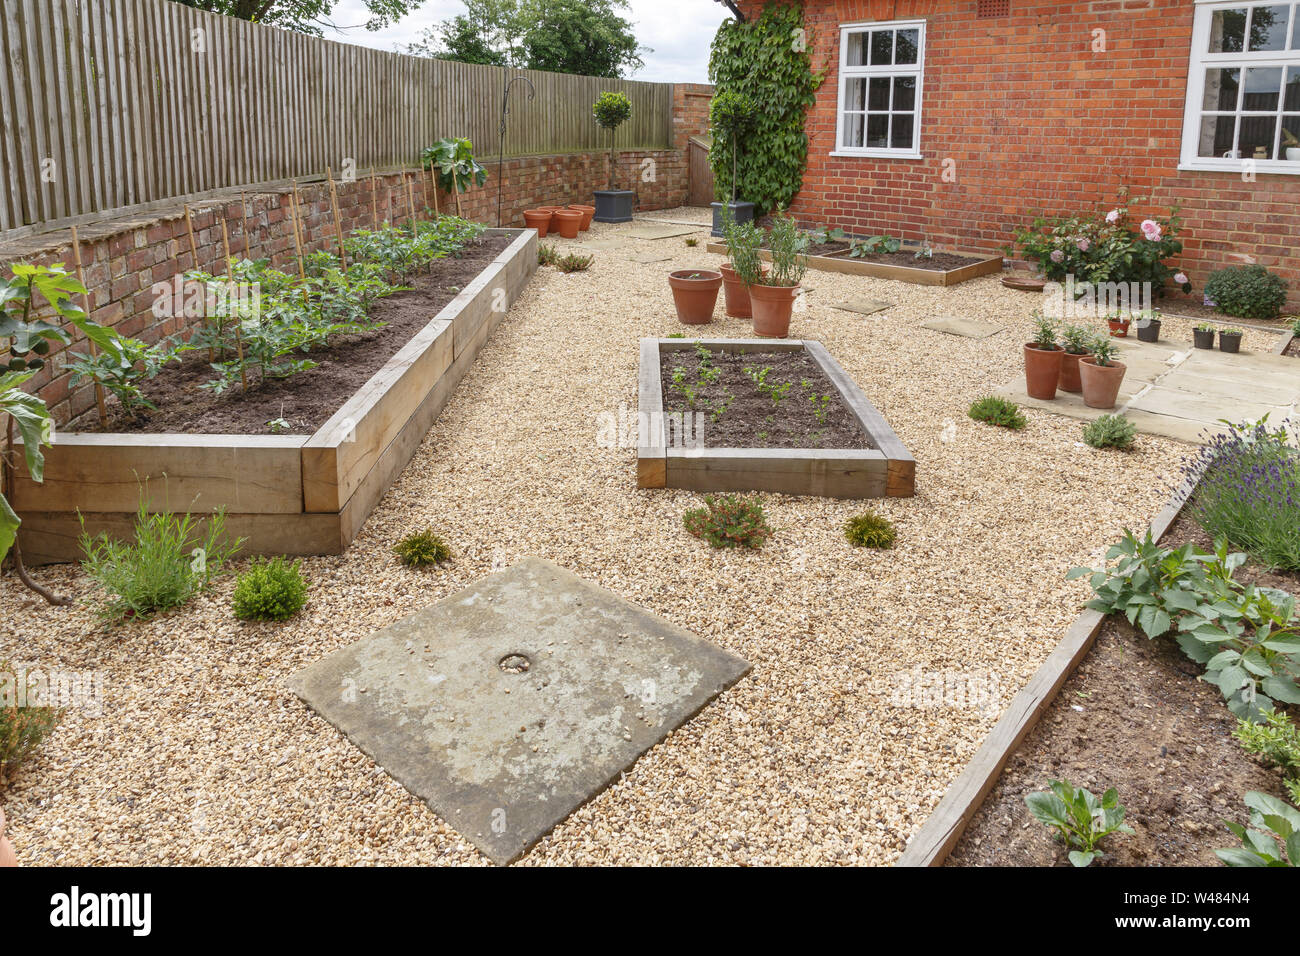 Oak sleeper raised beds in a courtyard garden design with hard landscpaing, gravel and terracotta pots Stock Photo